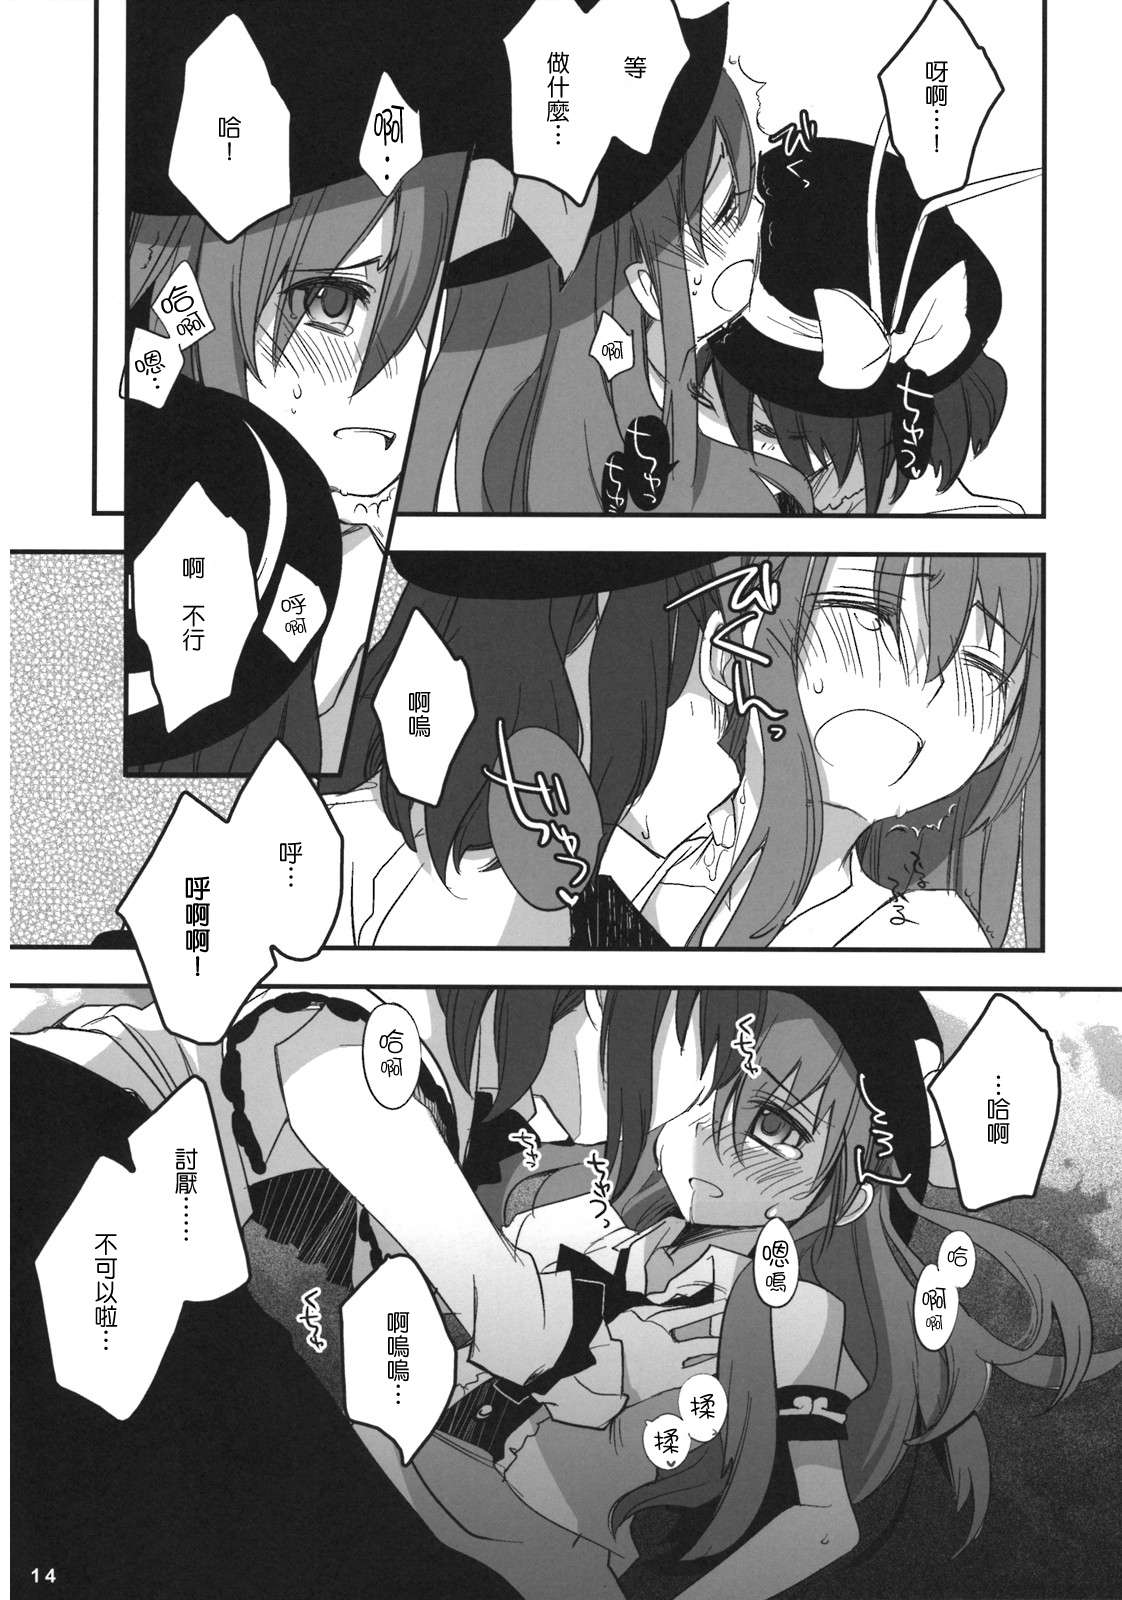 (C74) [Rengeza (Inui Nui)] Skyscraper (Touhou Project) [Chinese] [Nice漢化] page 13 full